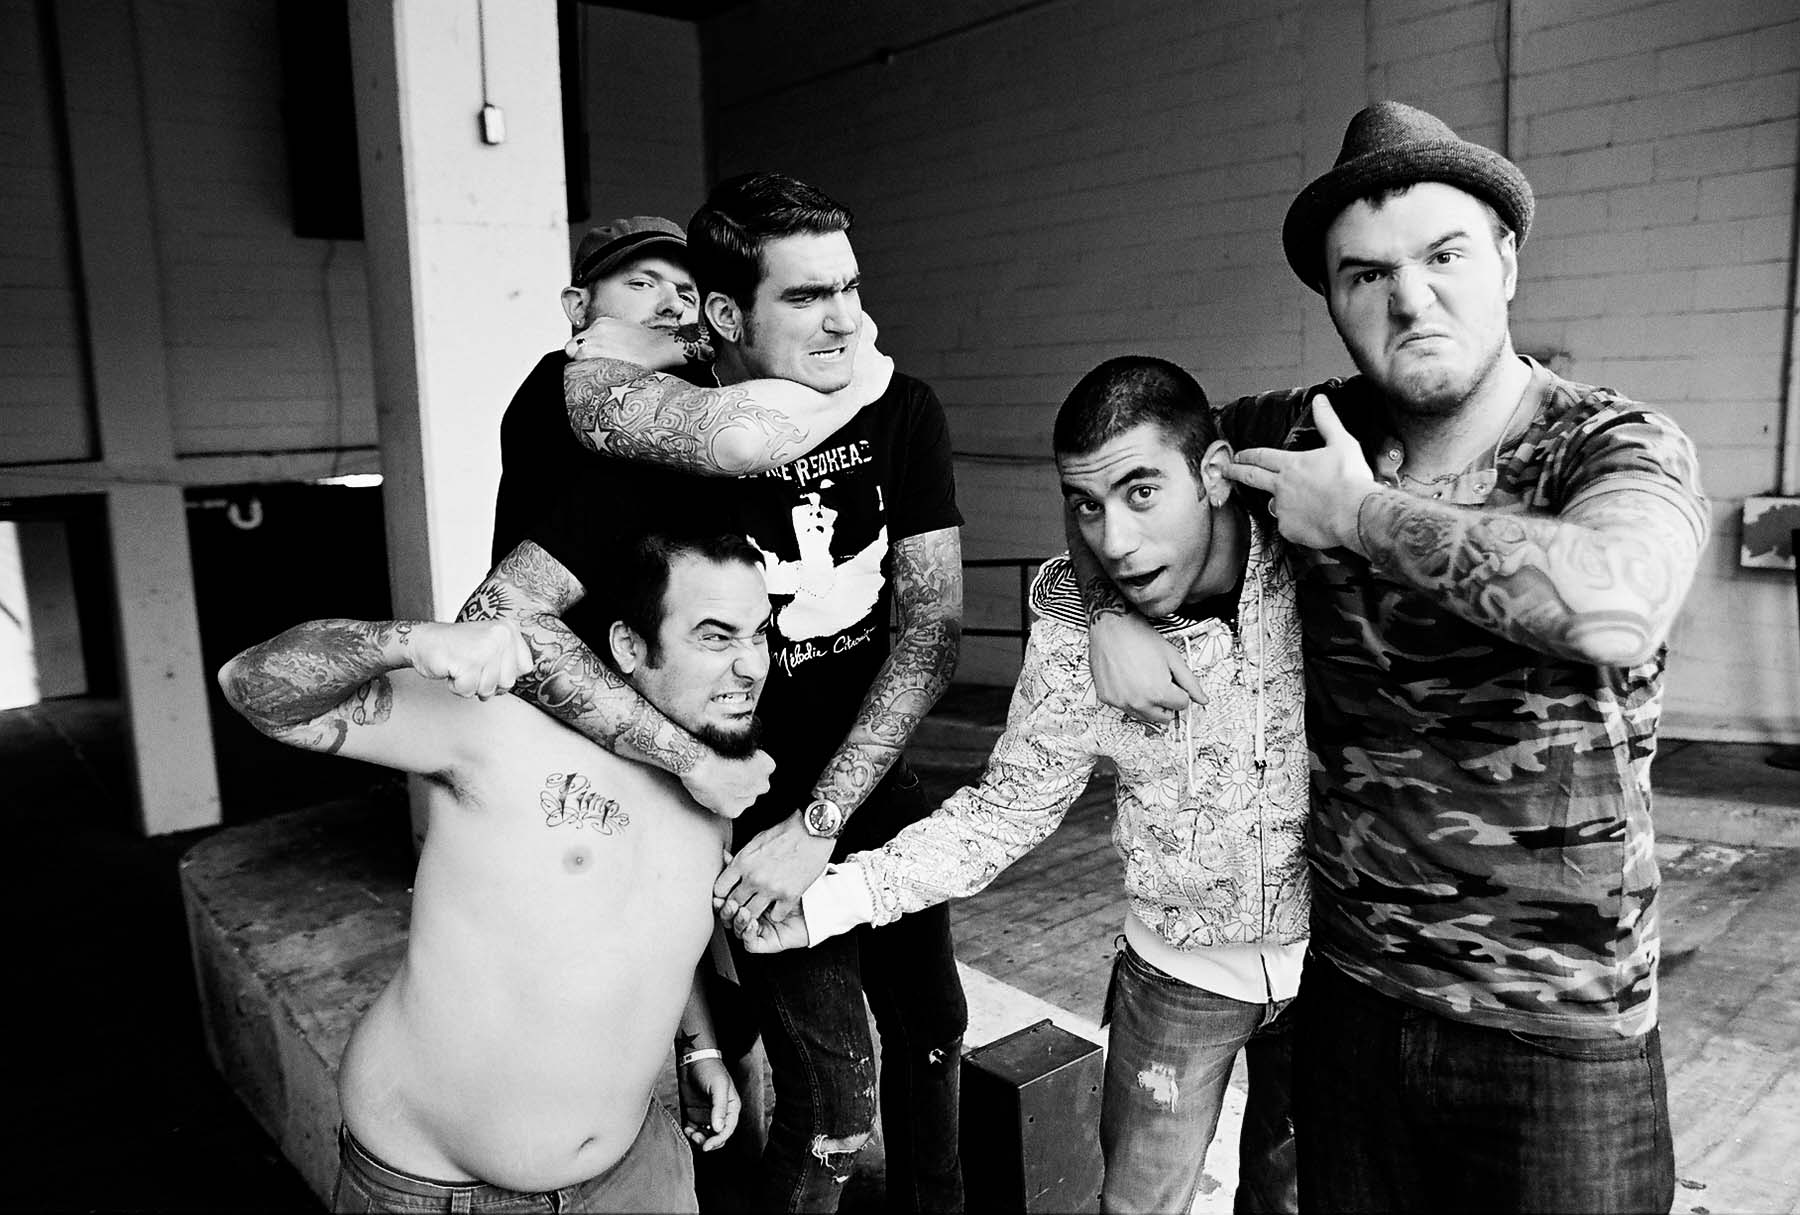 New Music: New Found Glory Years From Now Official Music Video